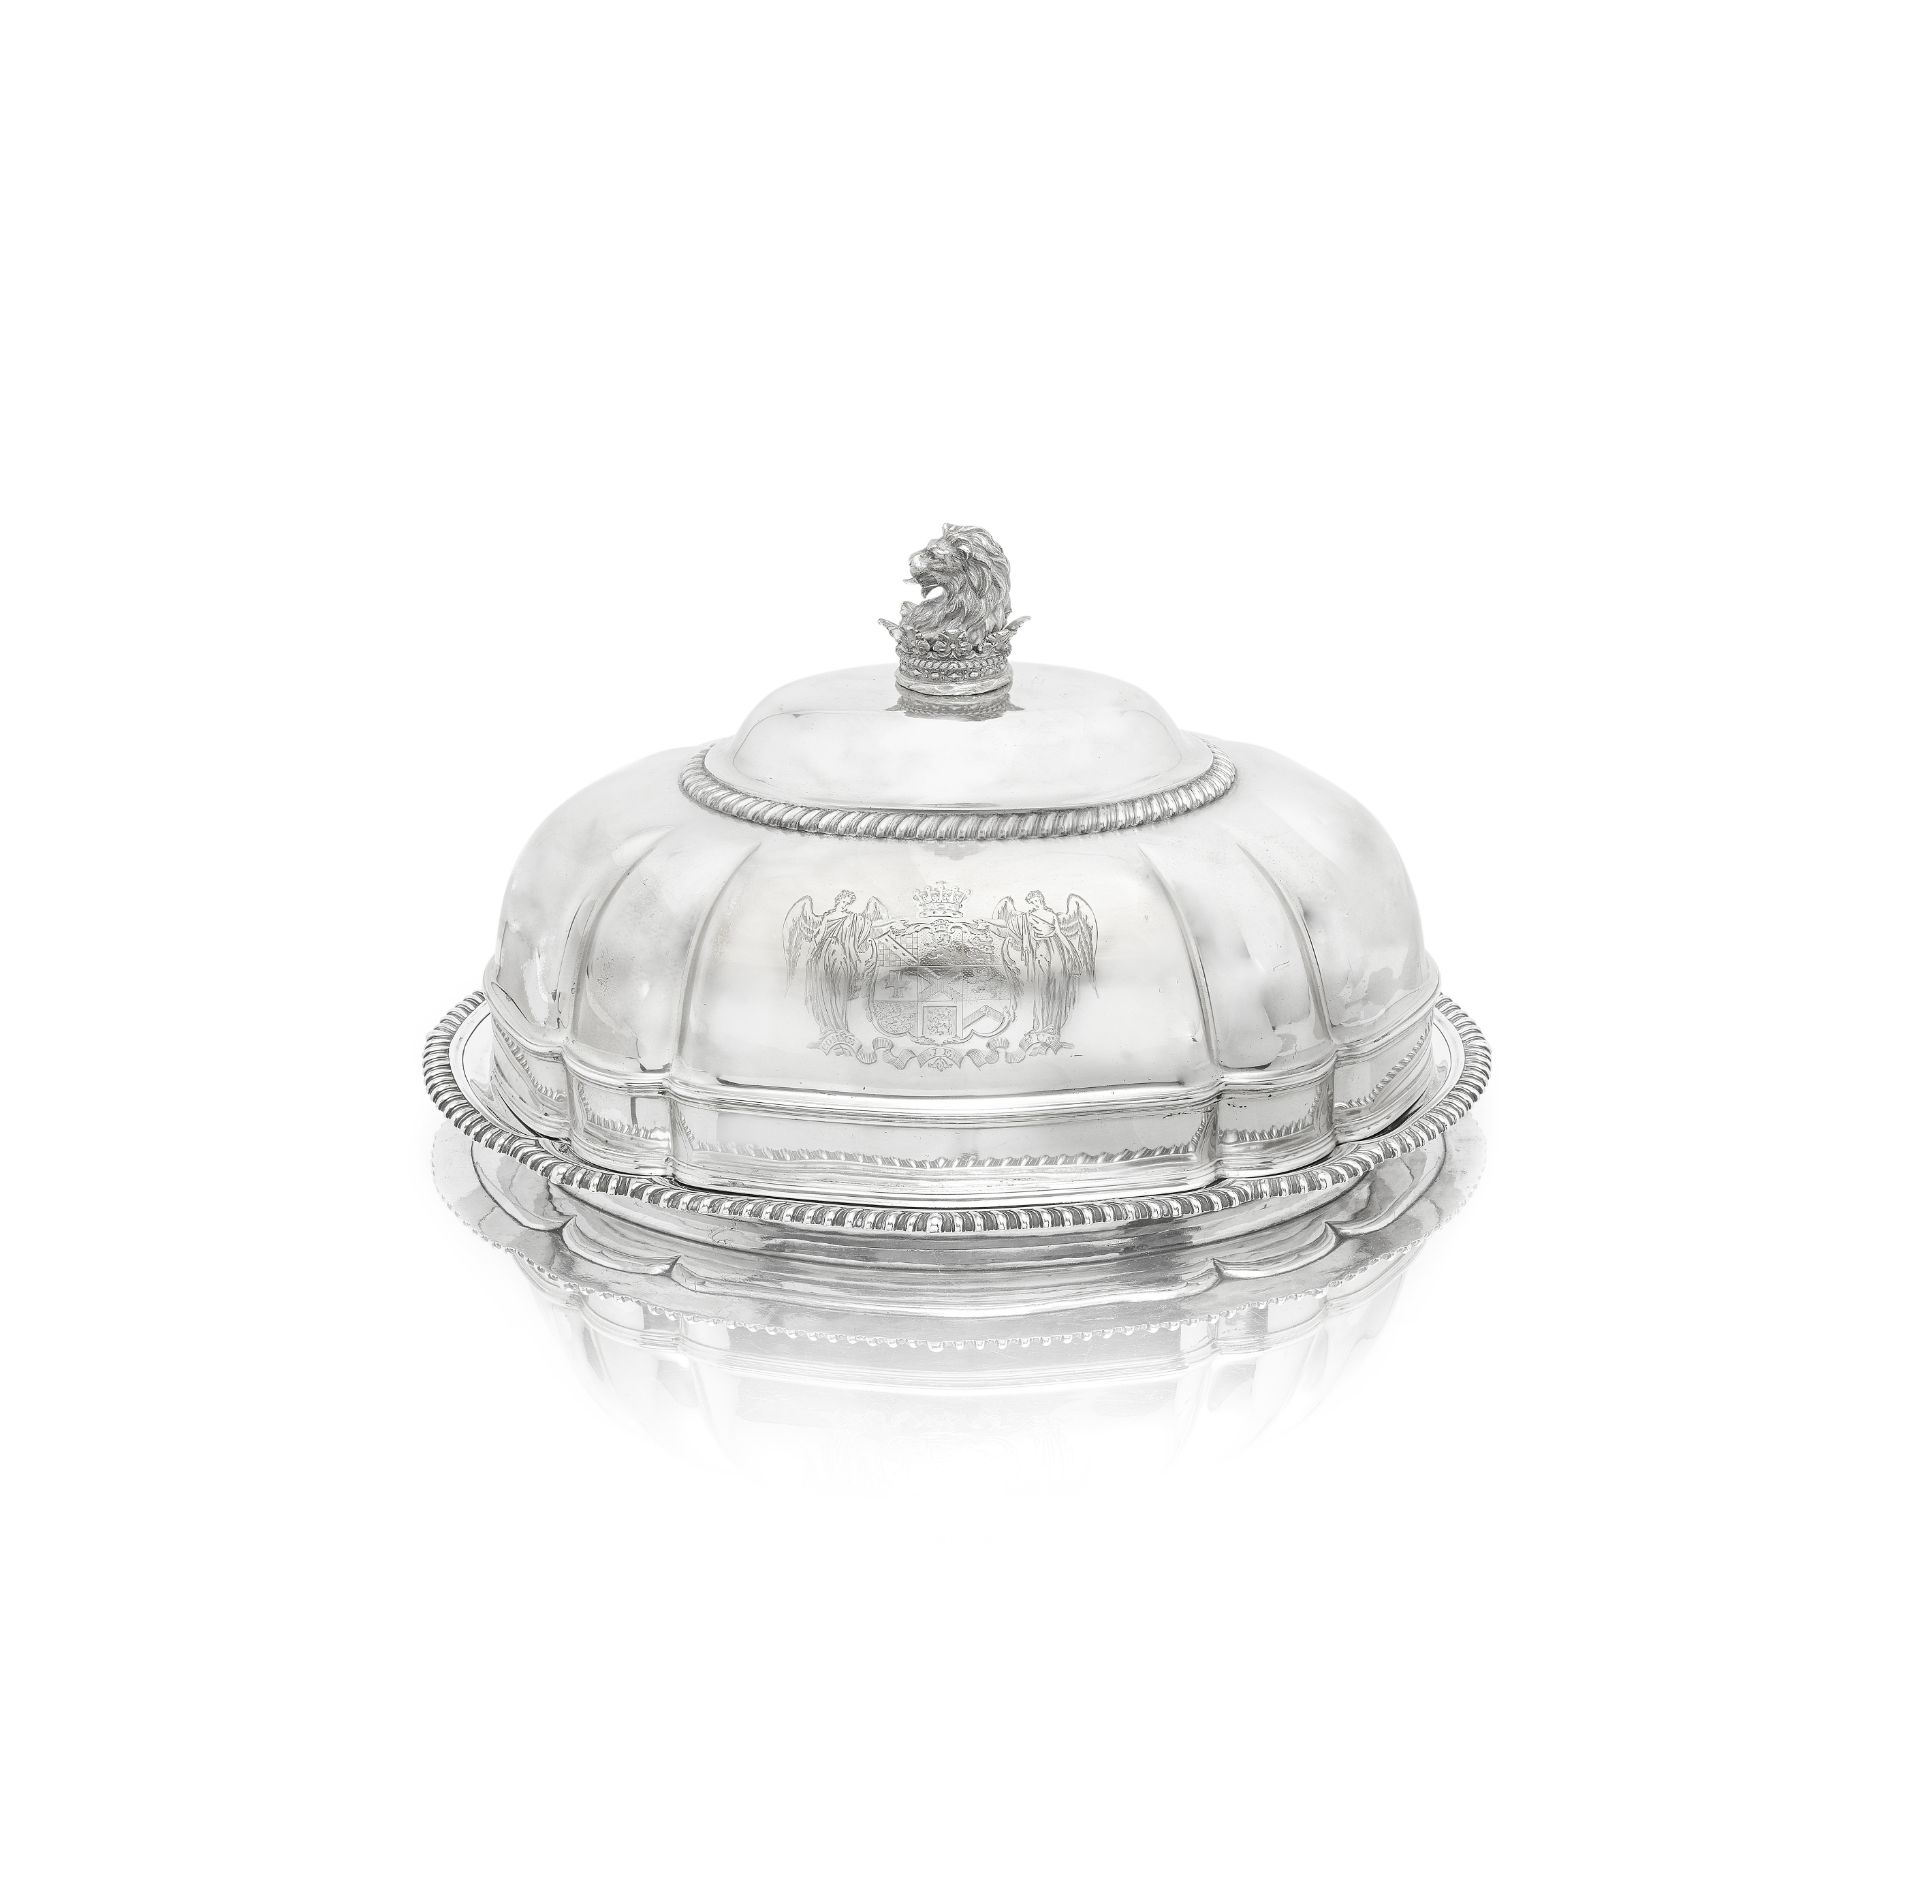 An impressive George IV silver meat dish and cover with mazarine Robert Garrard, London, base 18...